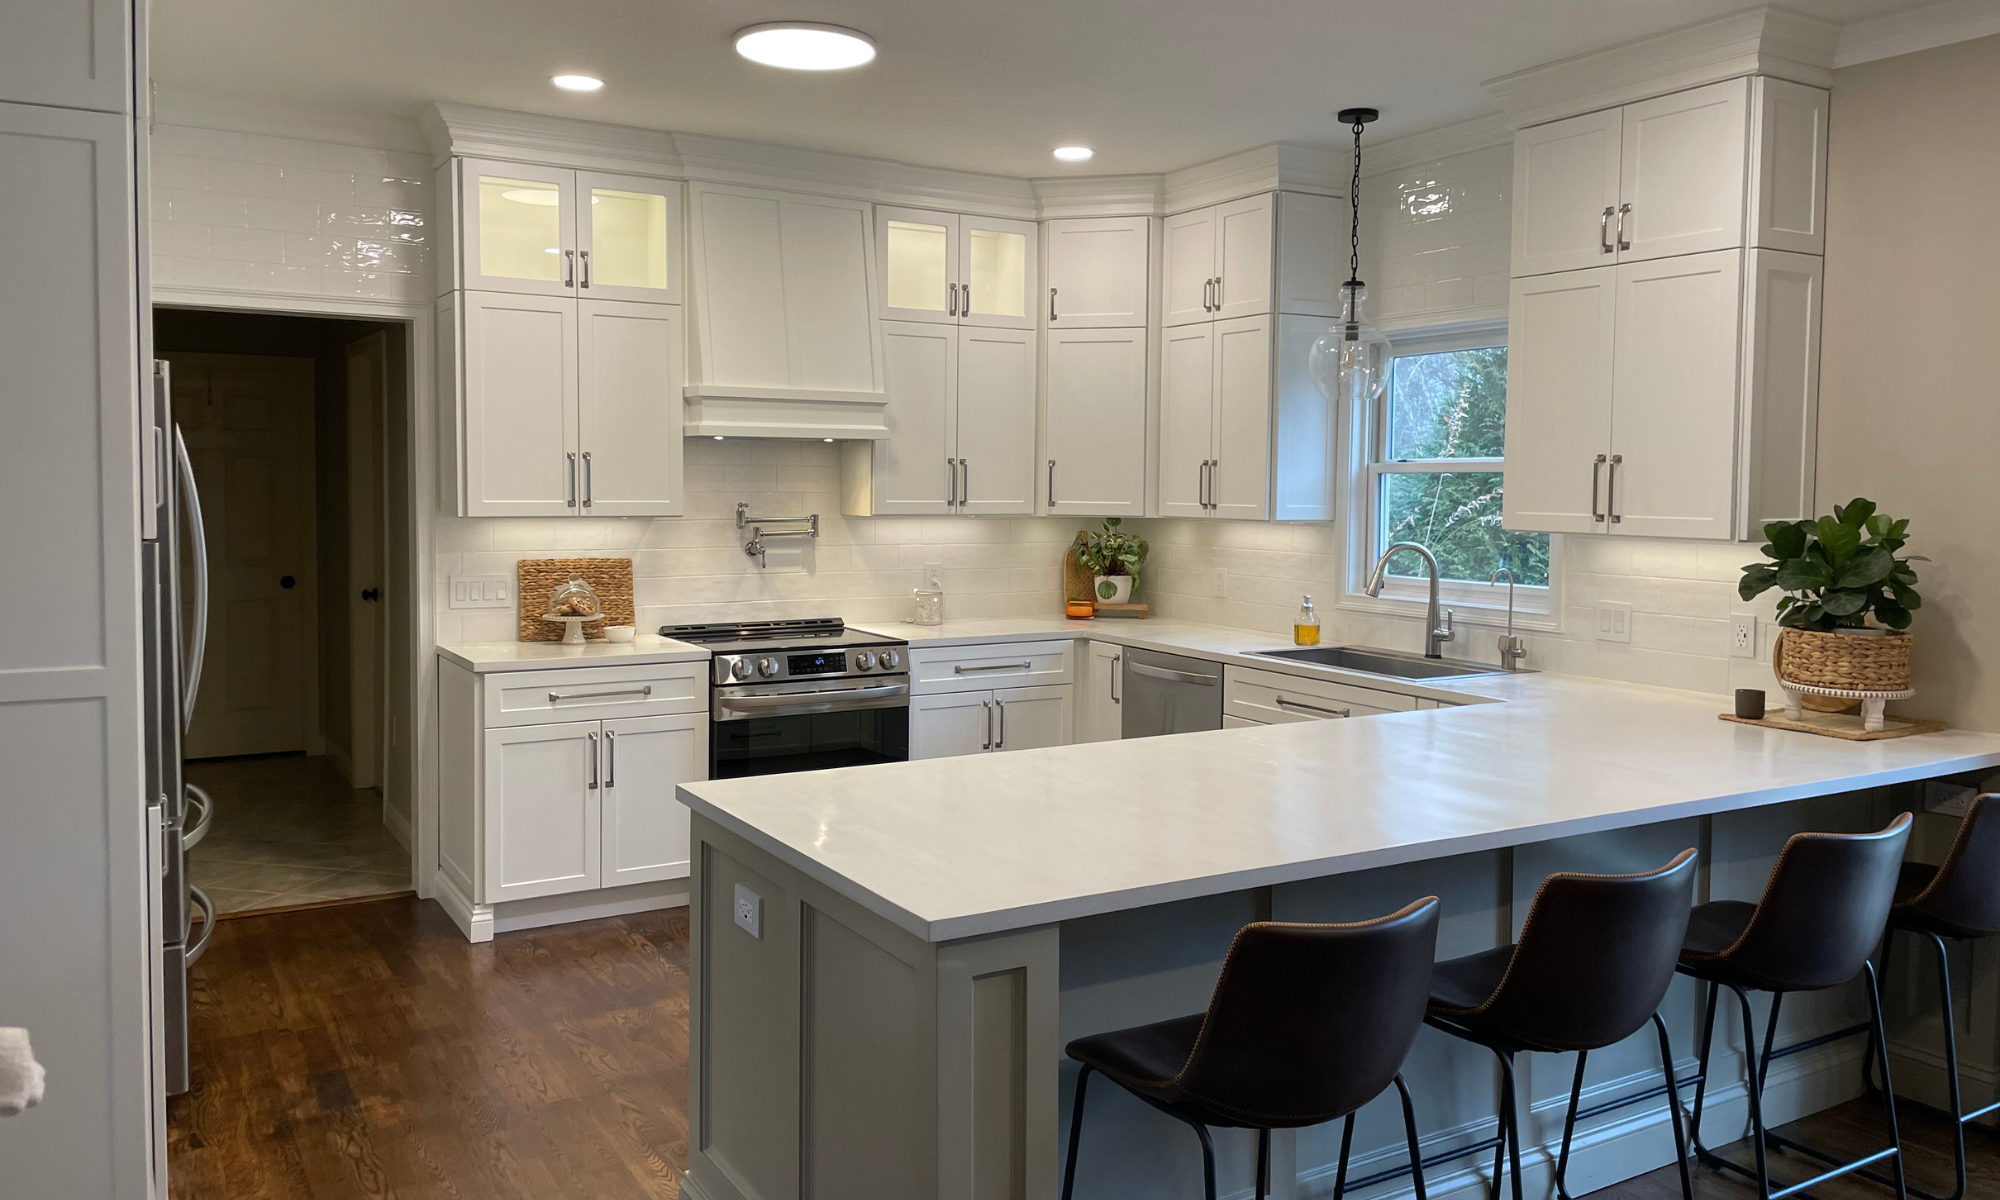 Remodeled kitchen with white cabinet doors and drawer fronts.